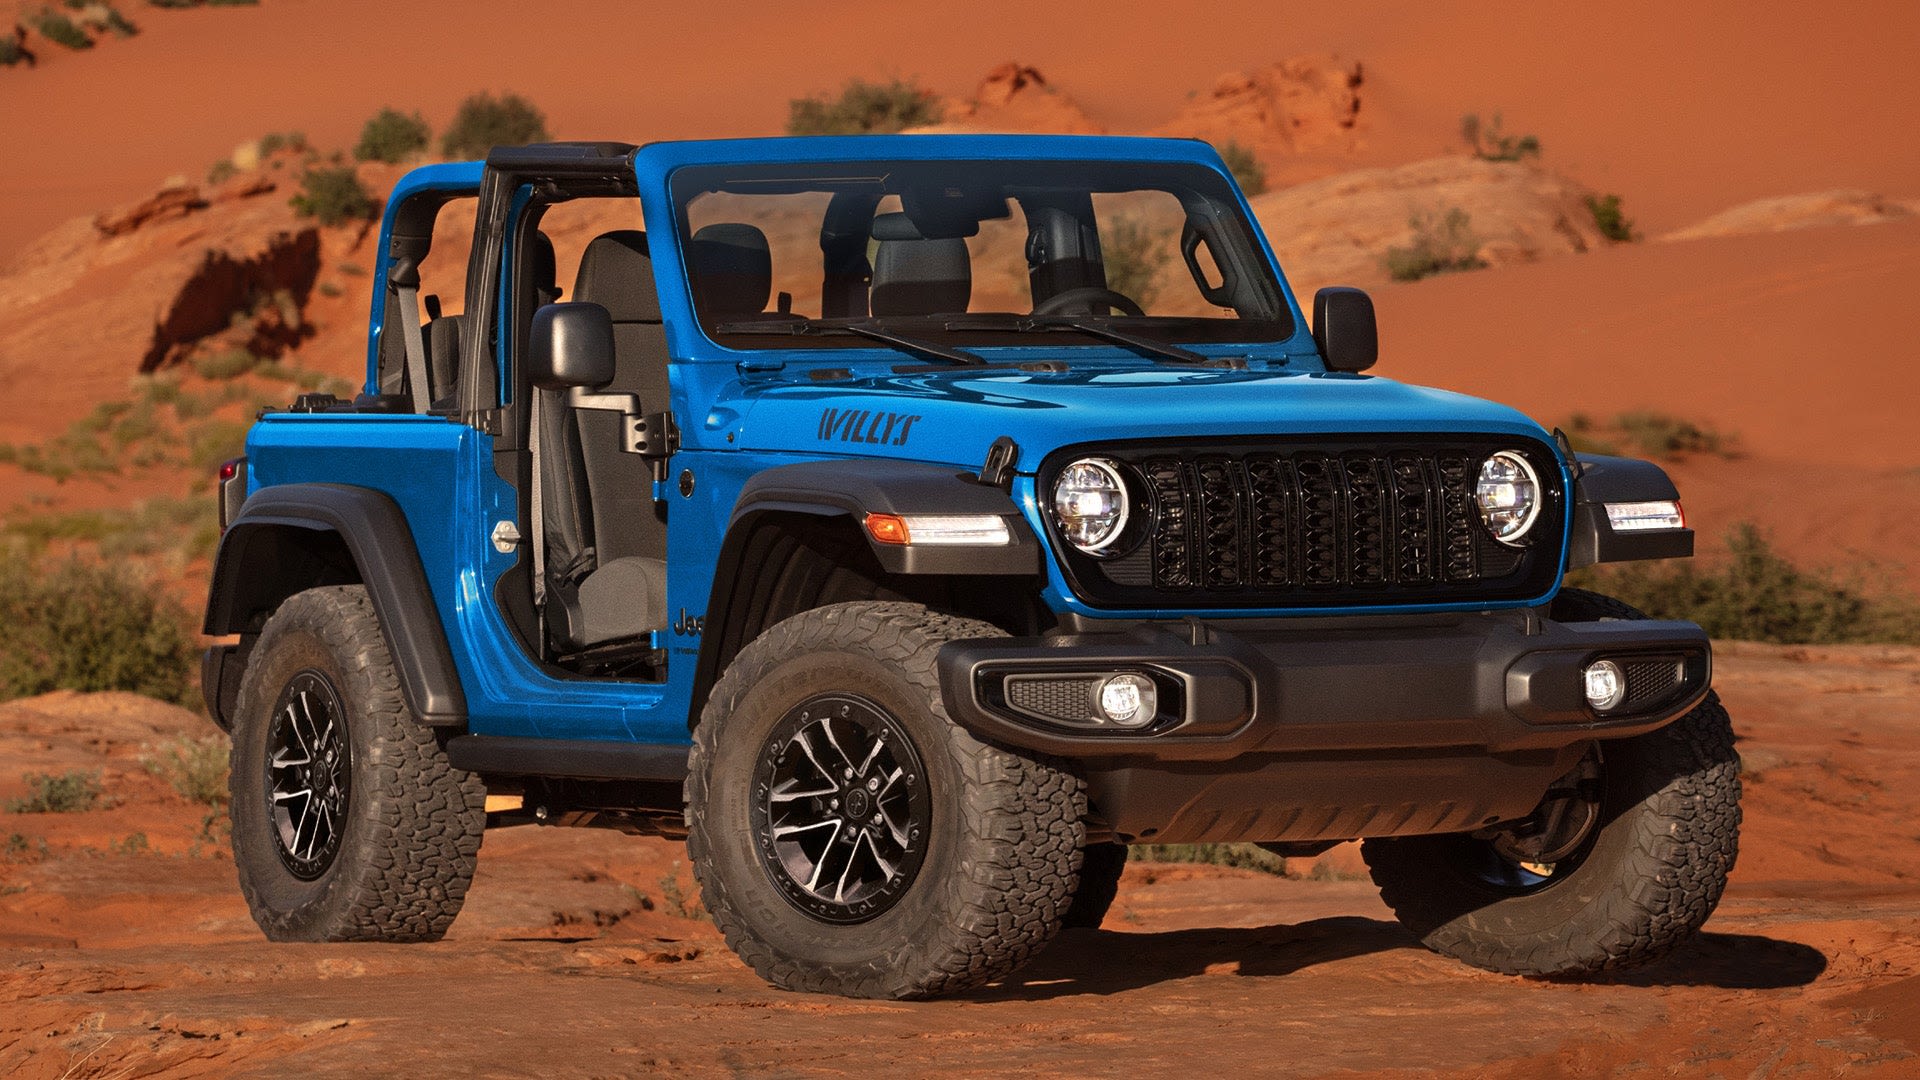 Jeep Boss Says It ‘Probably’ Needs To Reduce Number of Model Trims